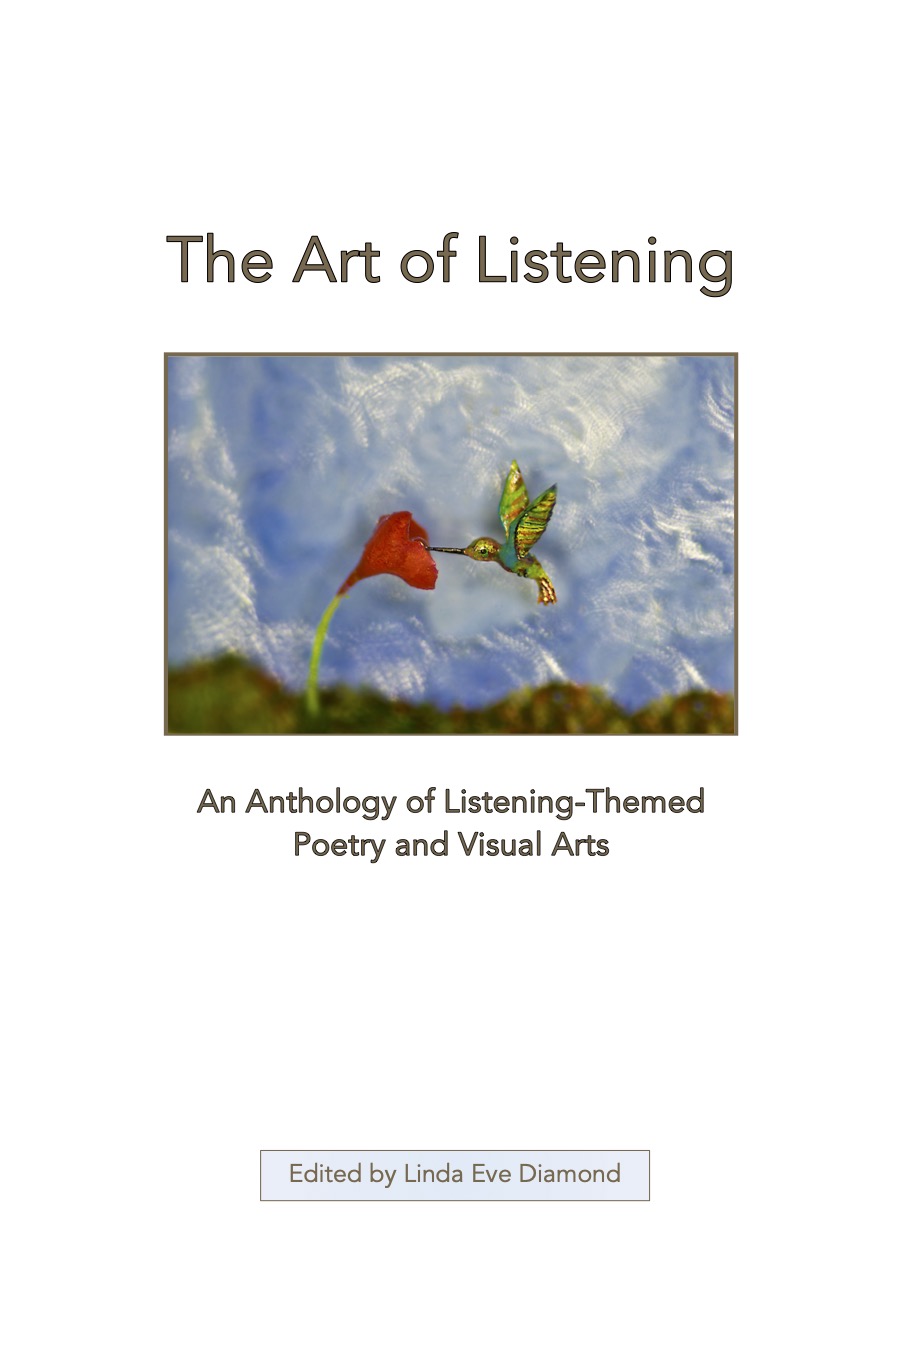 The Art of Listening Cover - featuring an micro-sculpture of a hummingbird by Willard Wigan 